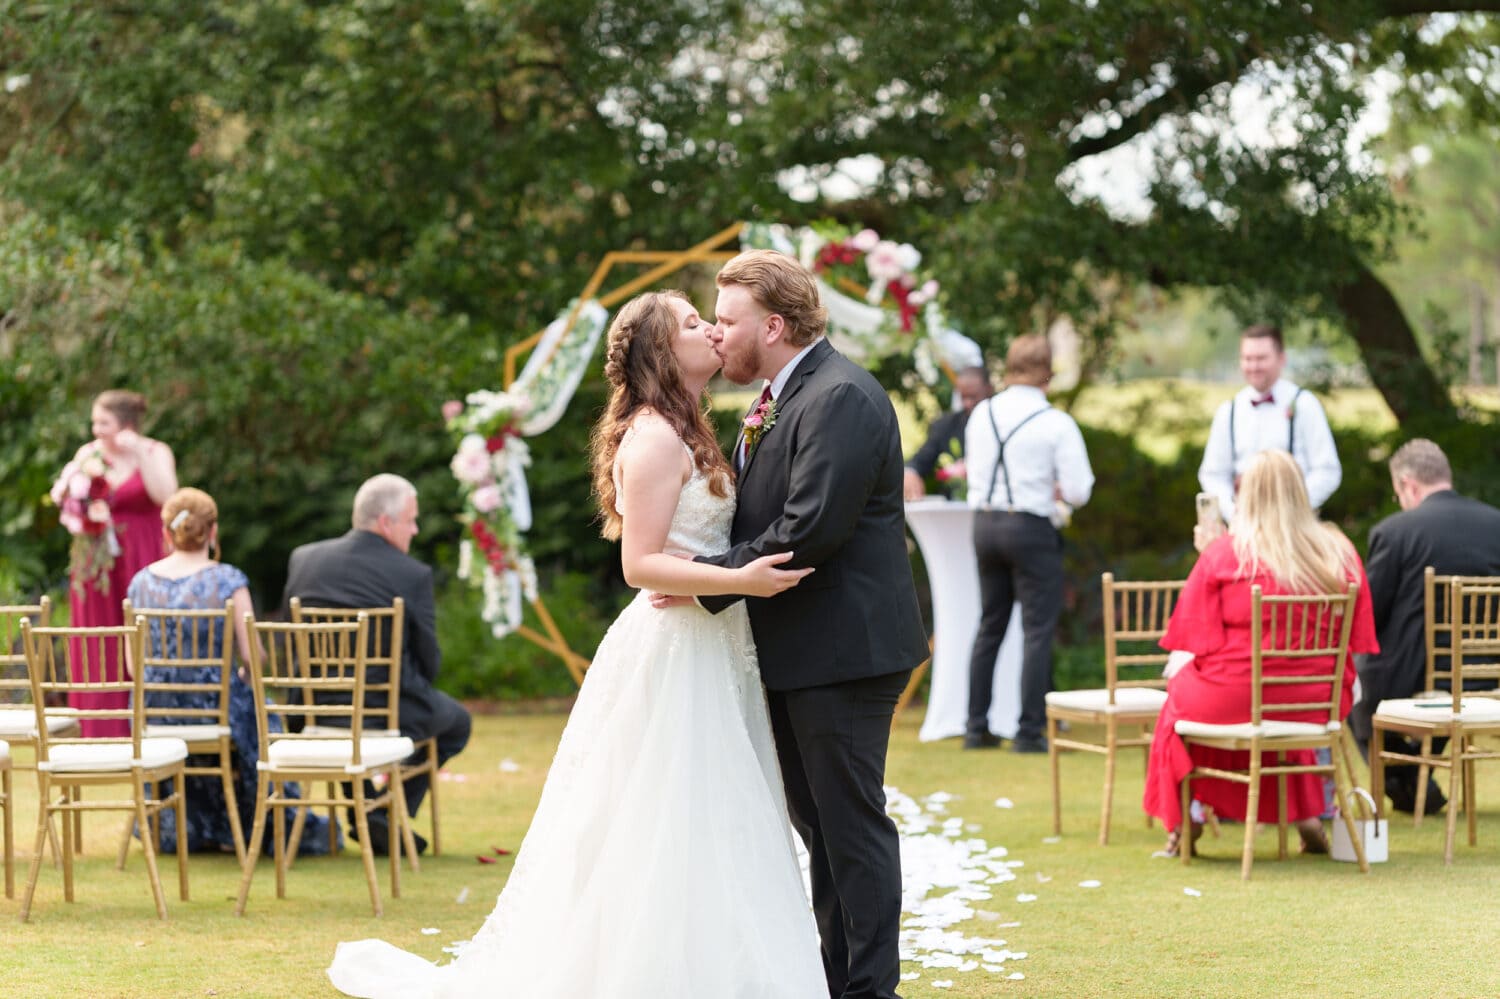 Kiss after the ceremony - Litchfield Country Club